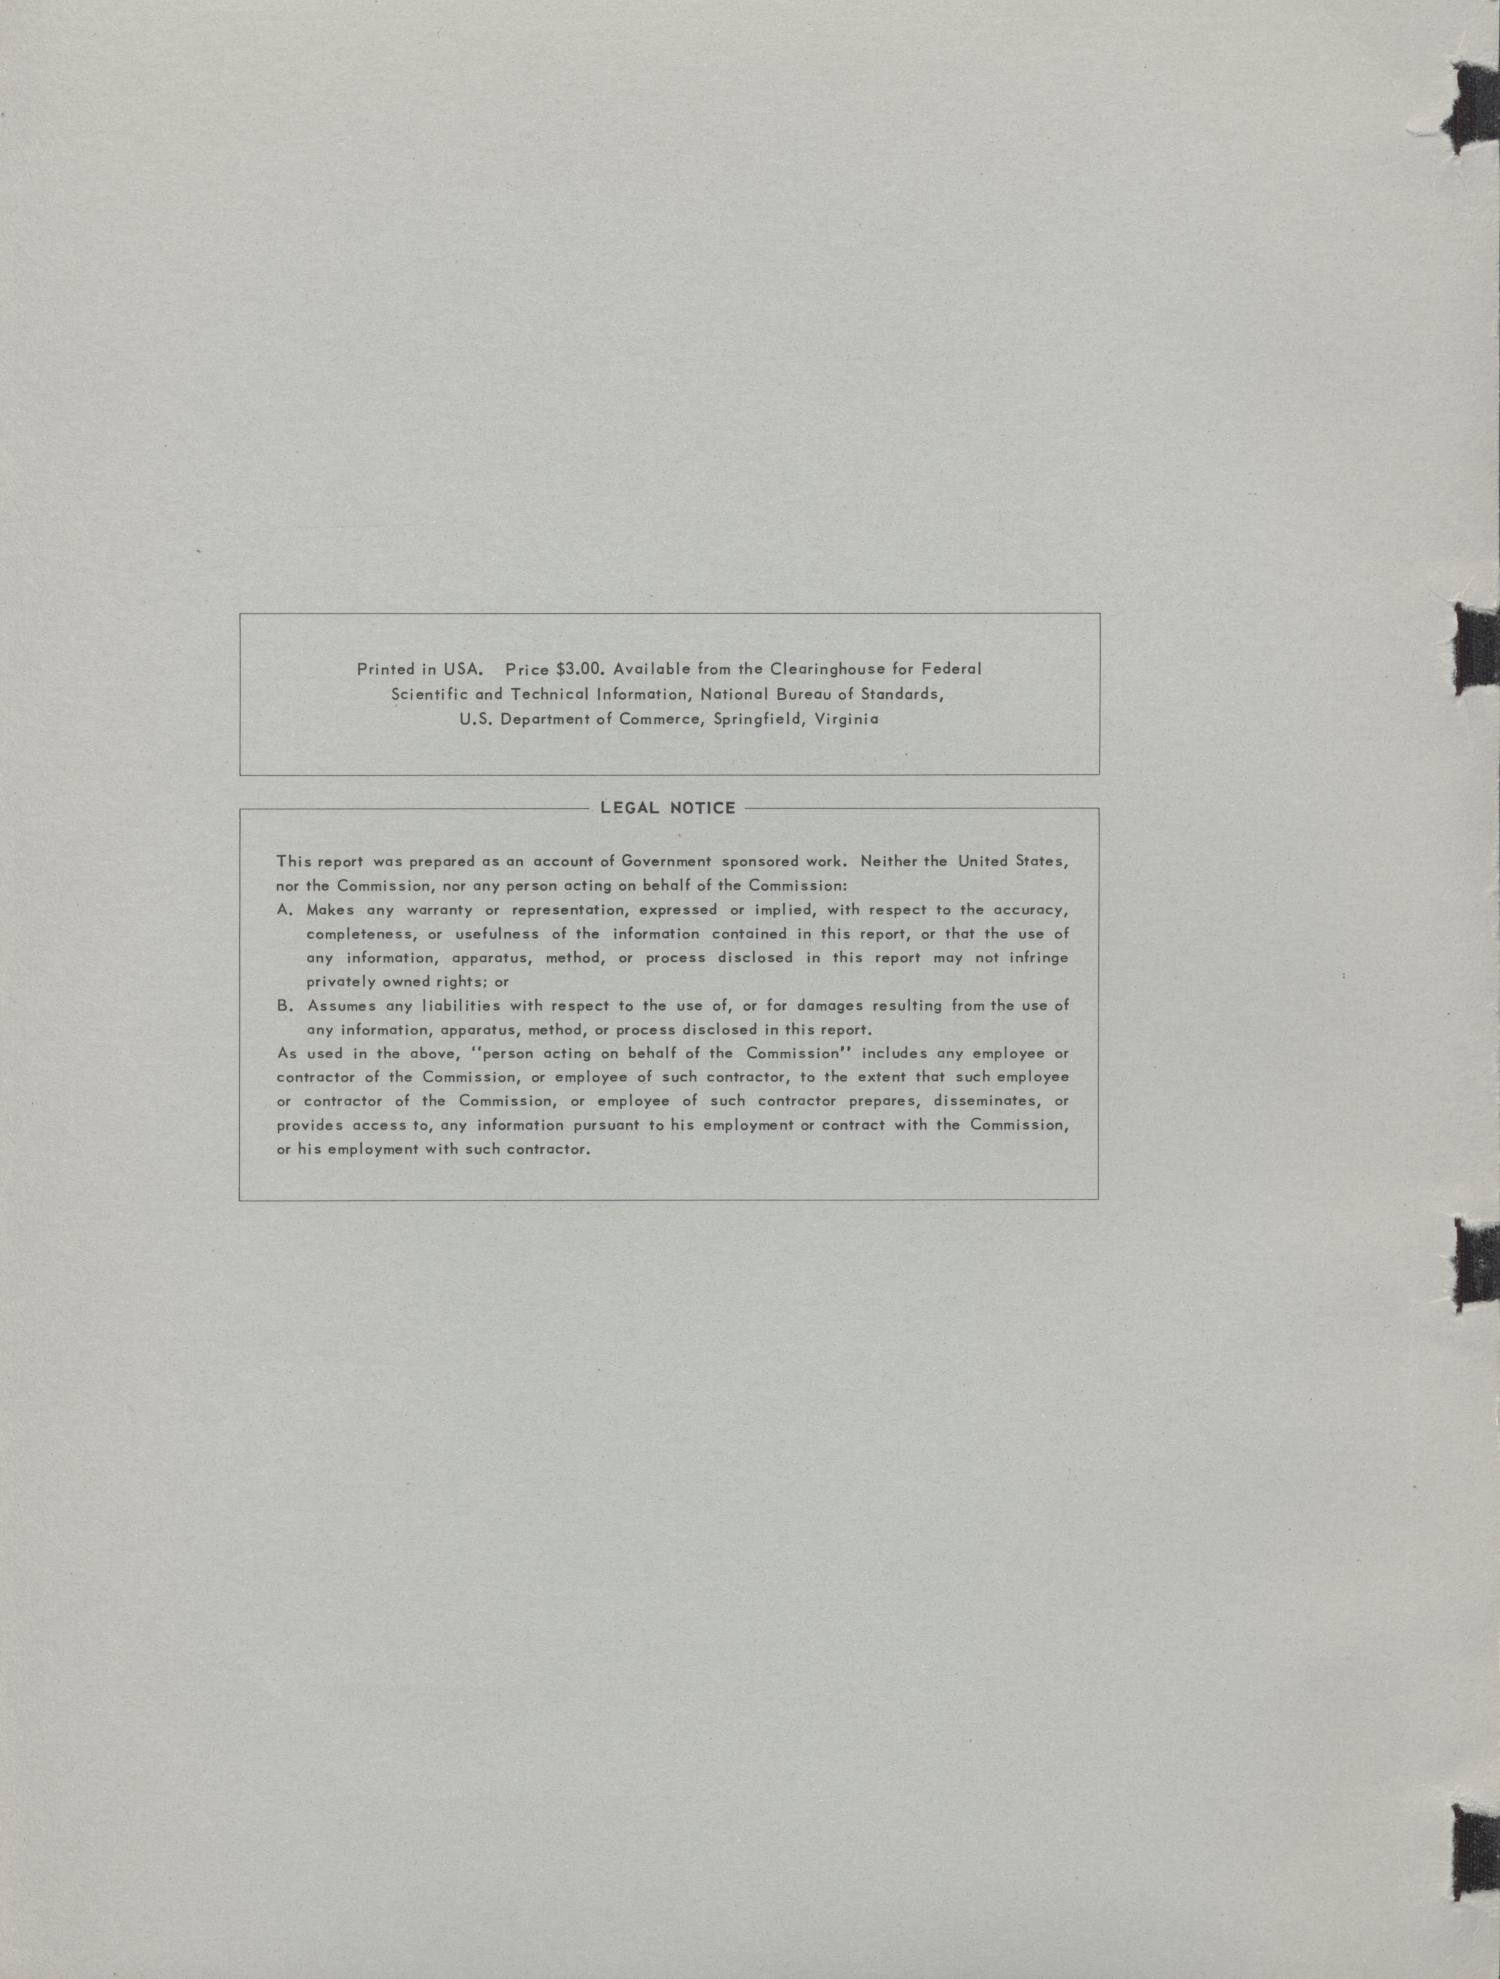 Maritime Reactor Project Annual Progress Report for Period Ending November 30, 1963
                                                
                                                    Front Inside
                                                